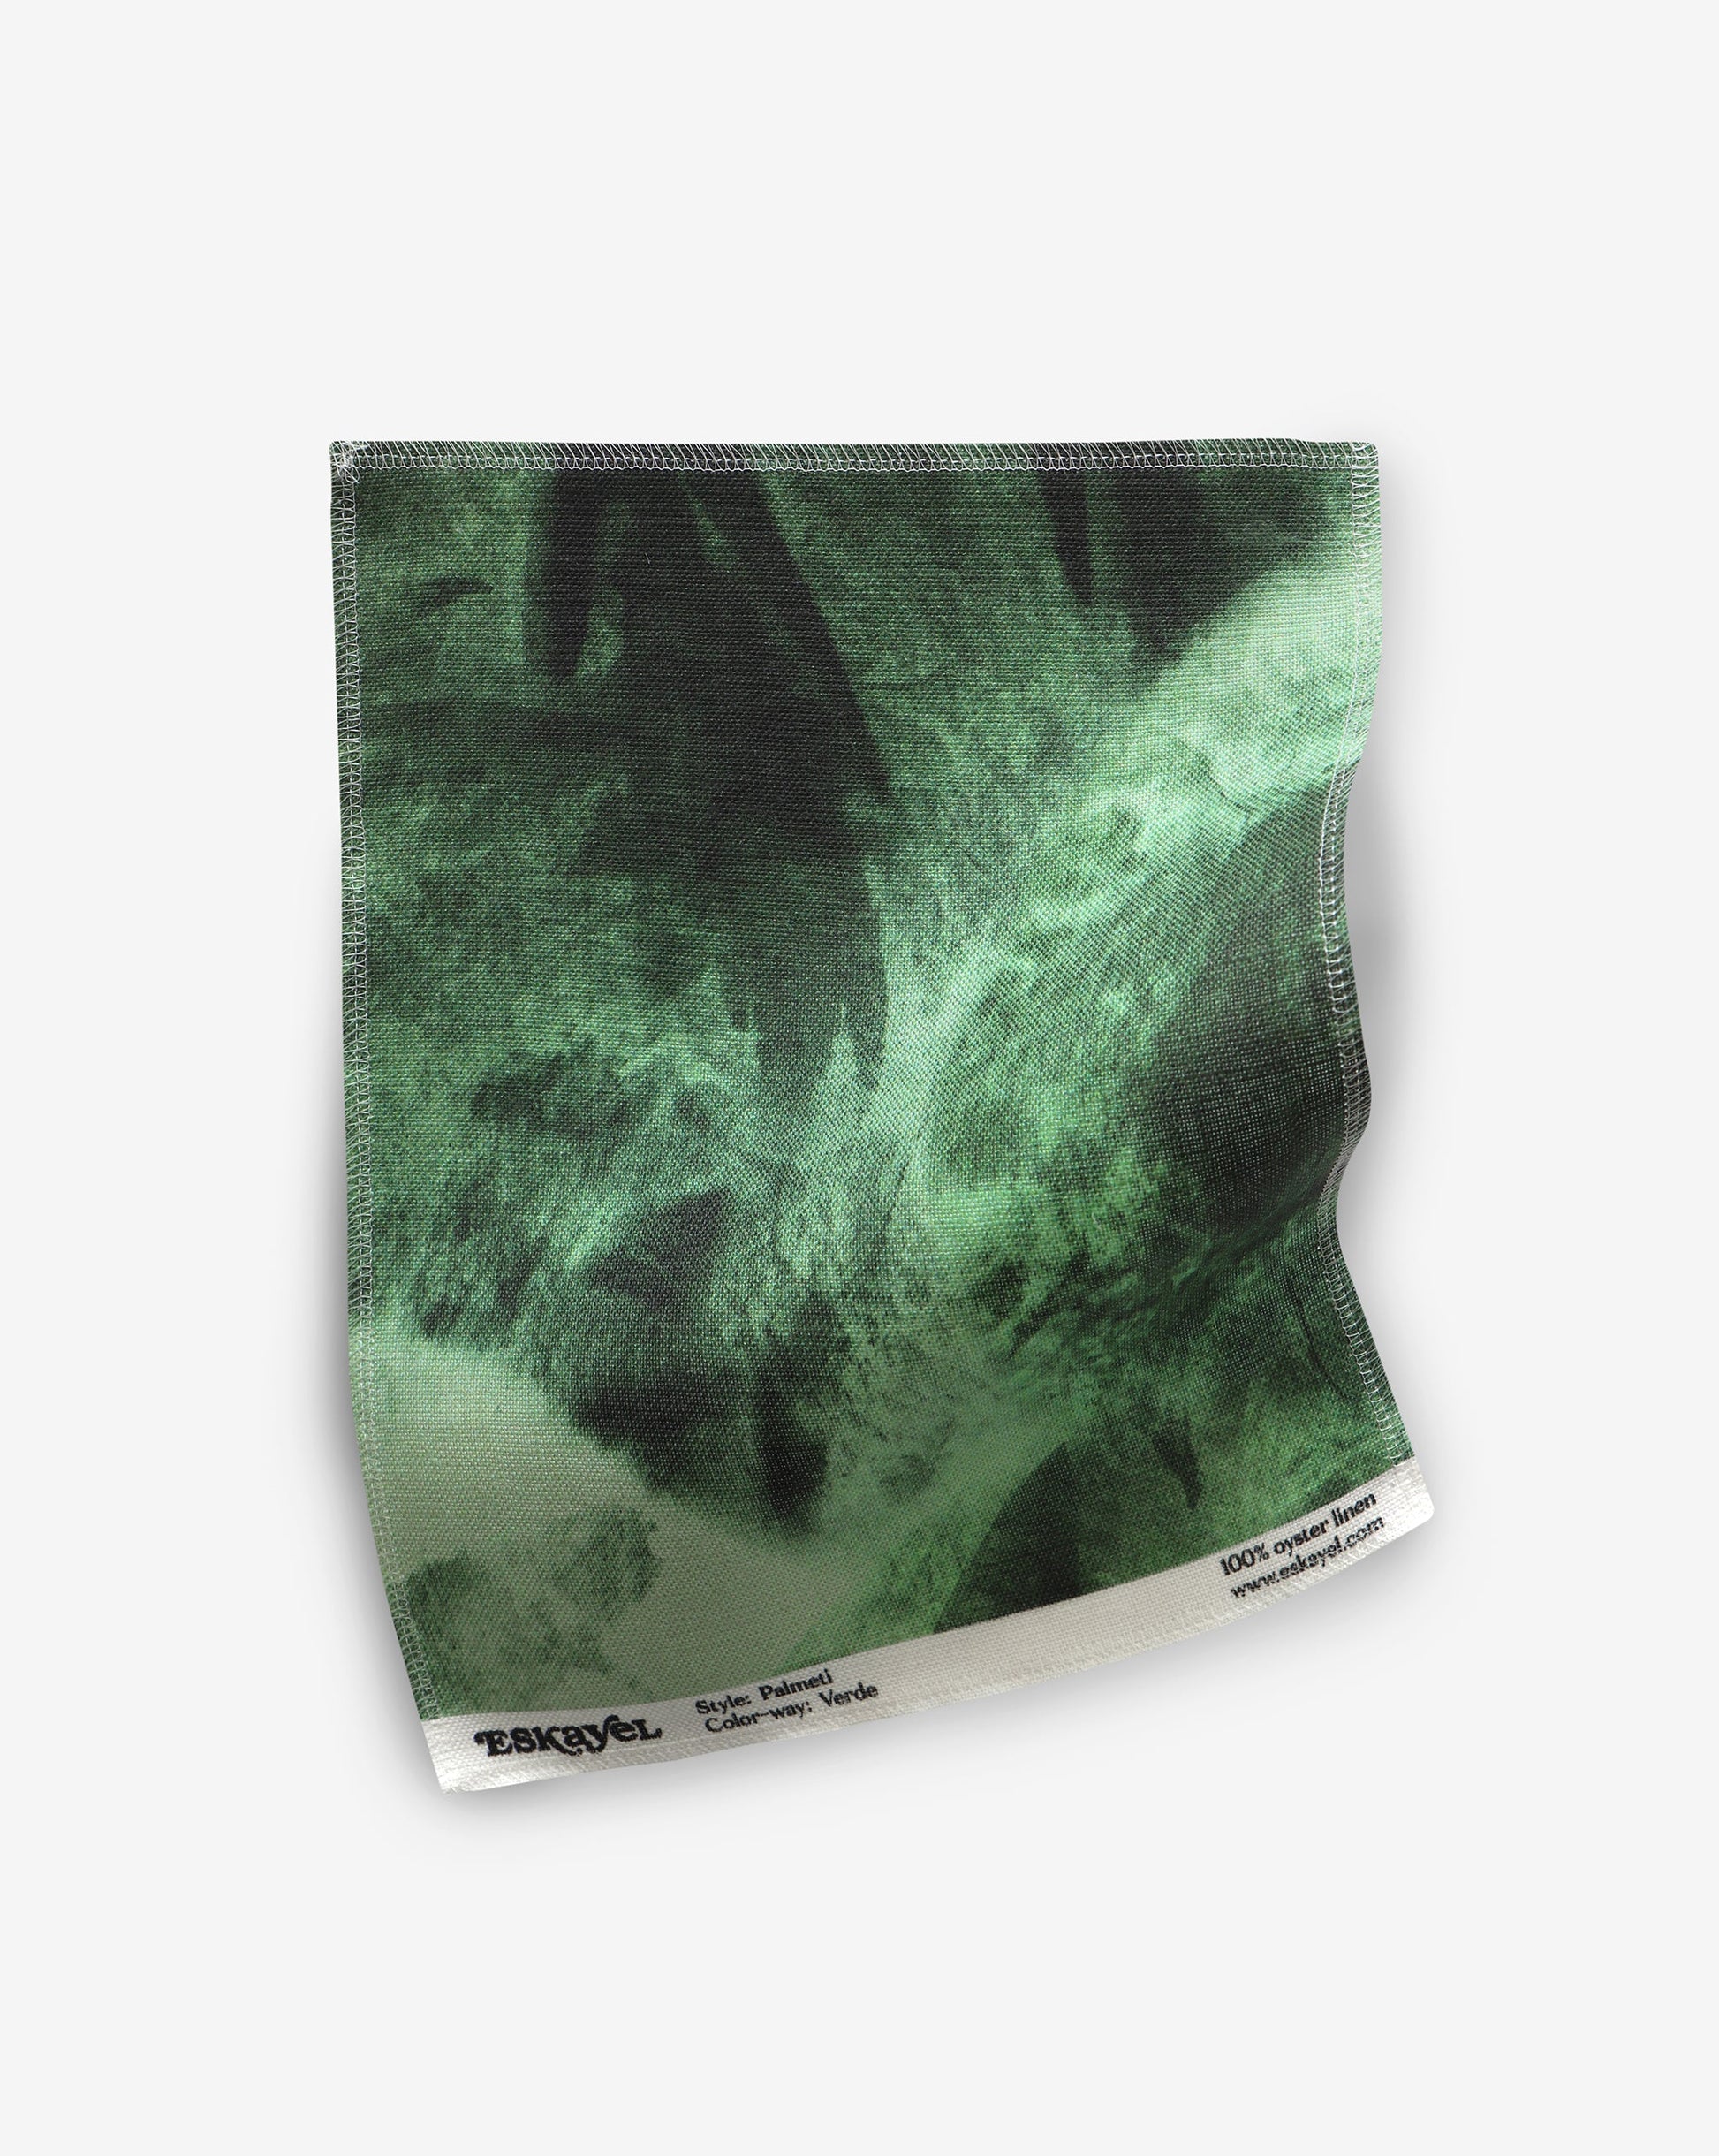 A green and black photo of a waterfall on a white background is an SEO-friendly image for those interested in Palmeti Fabric Verde or fabric pattern